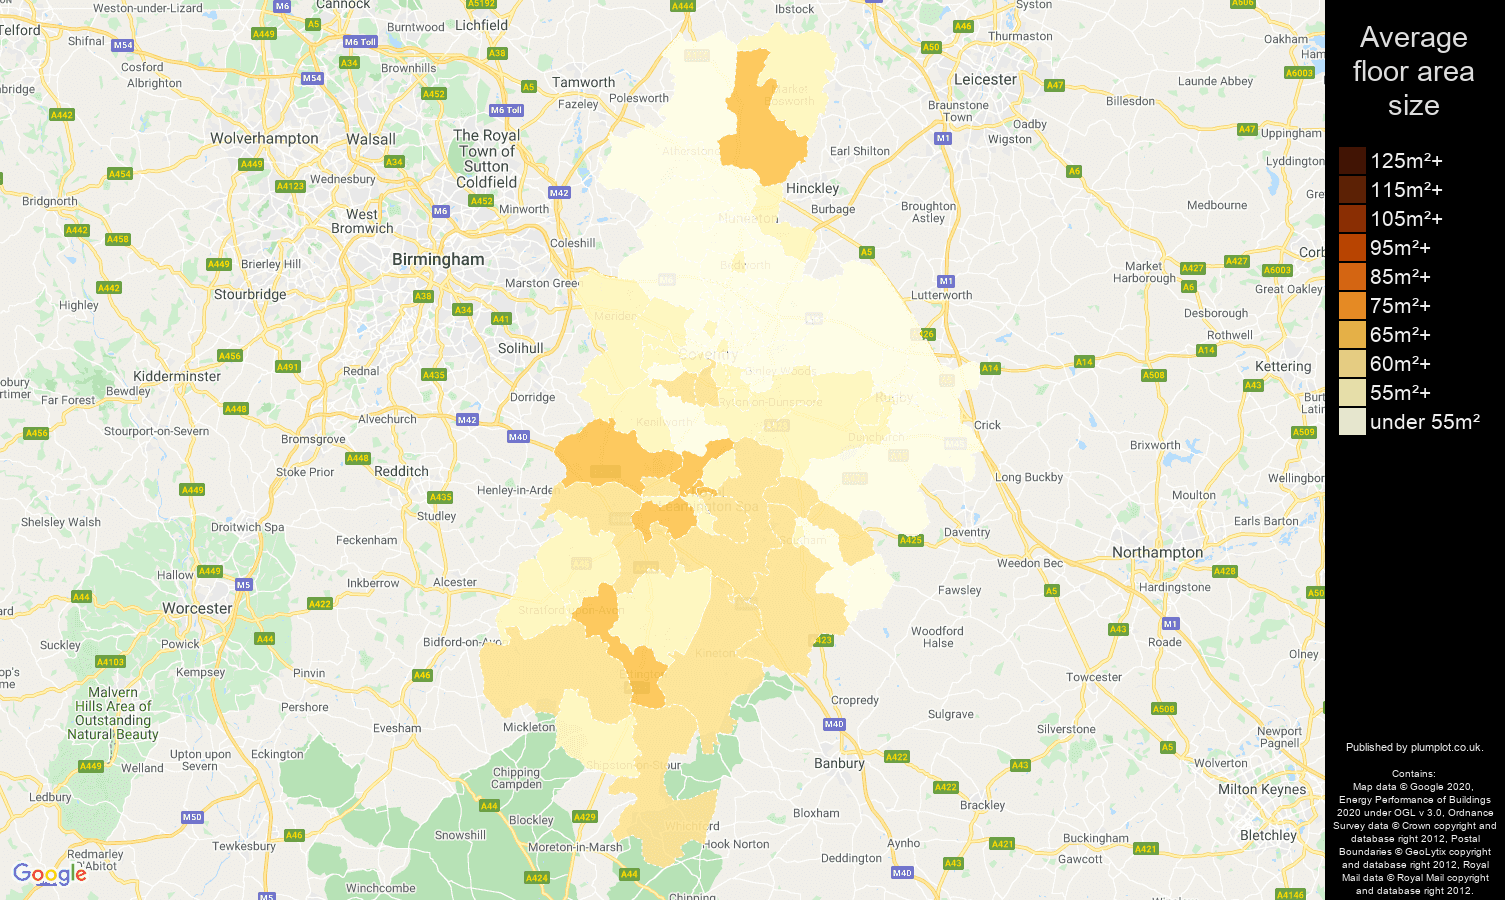 Coventry map of average floor area size of flats